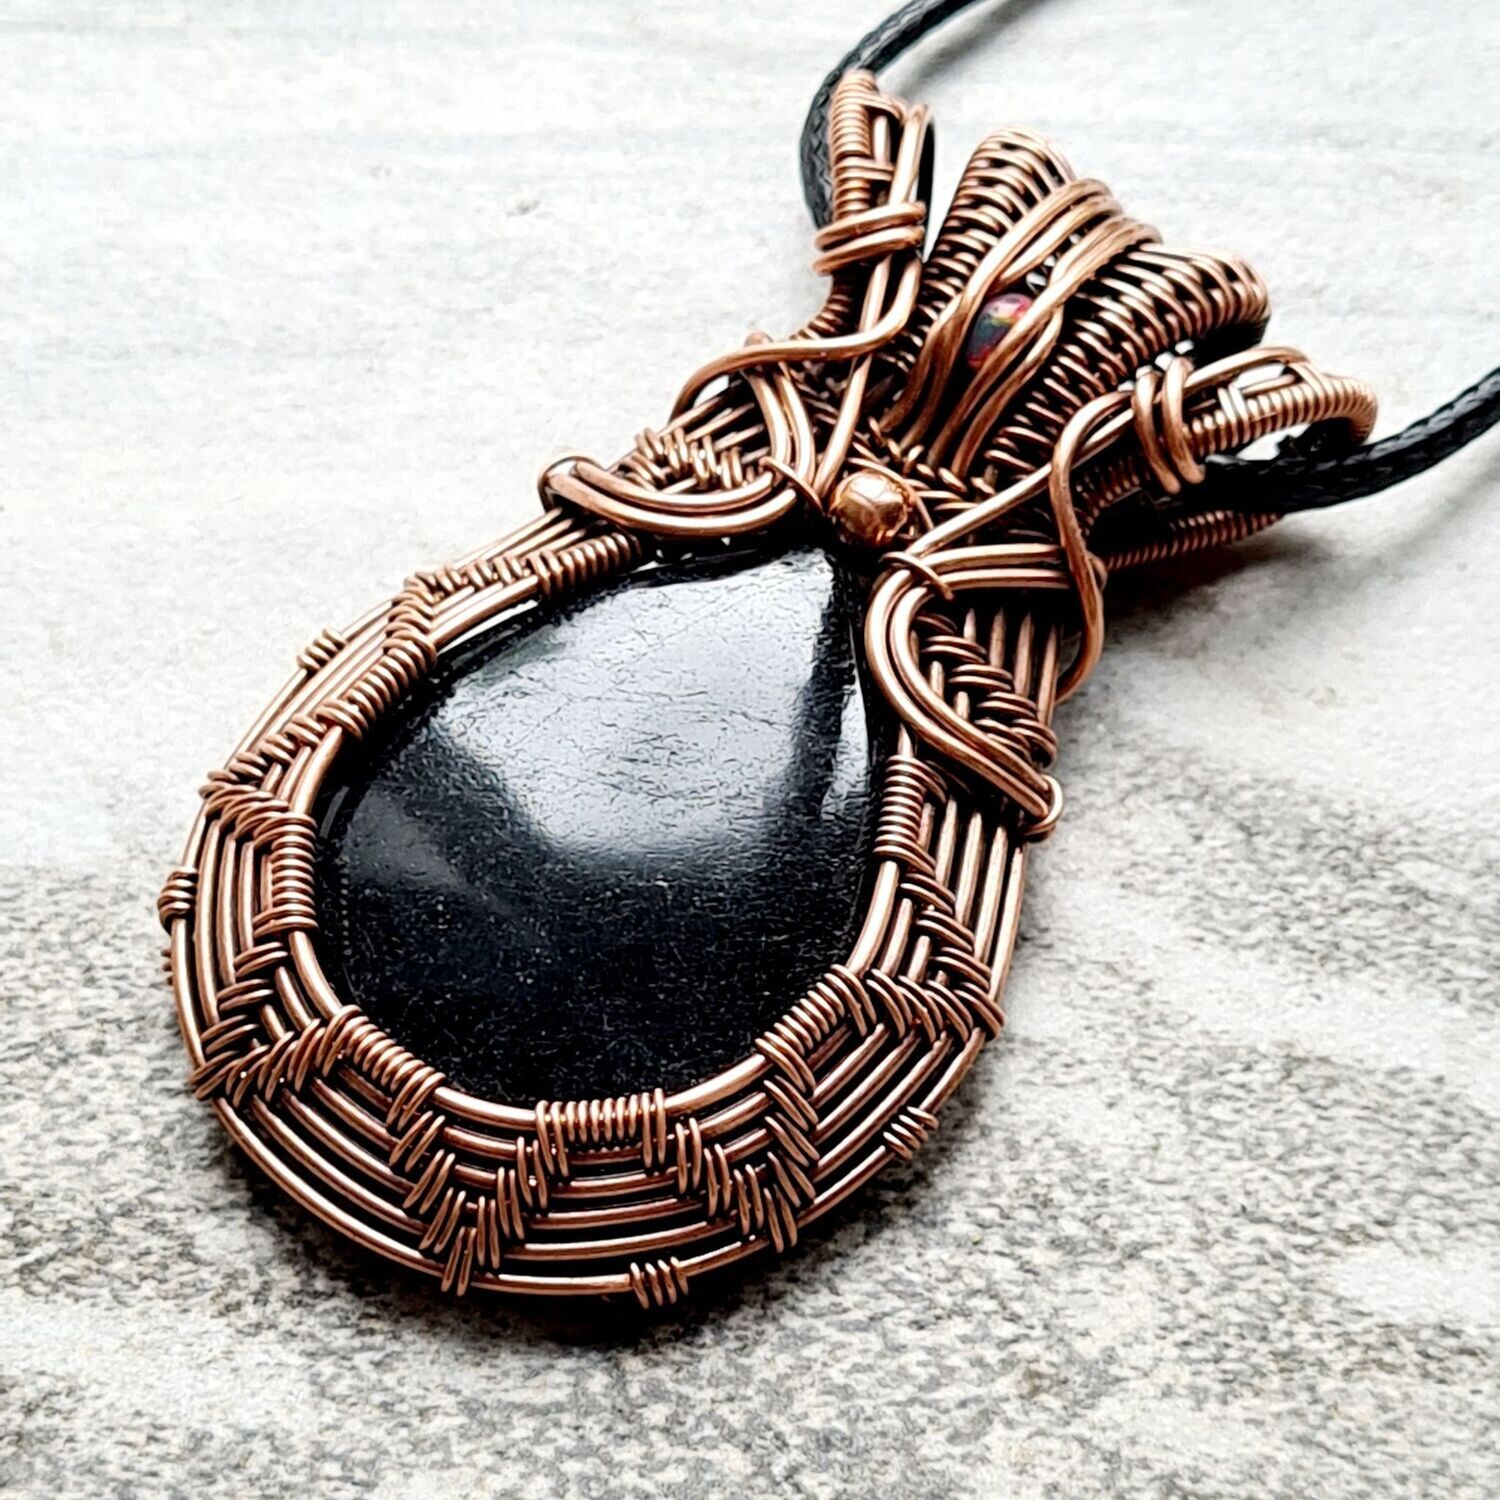 Black Obsidian with Black Opal accent pendant with chain.